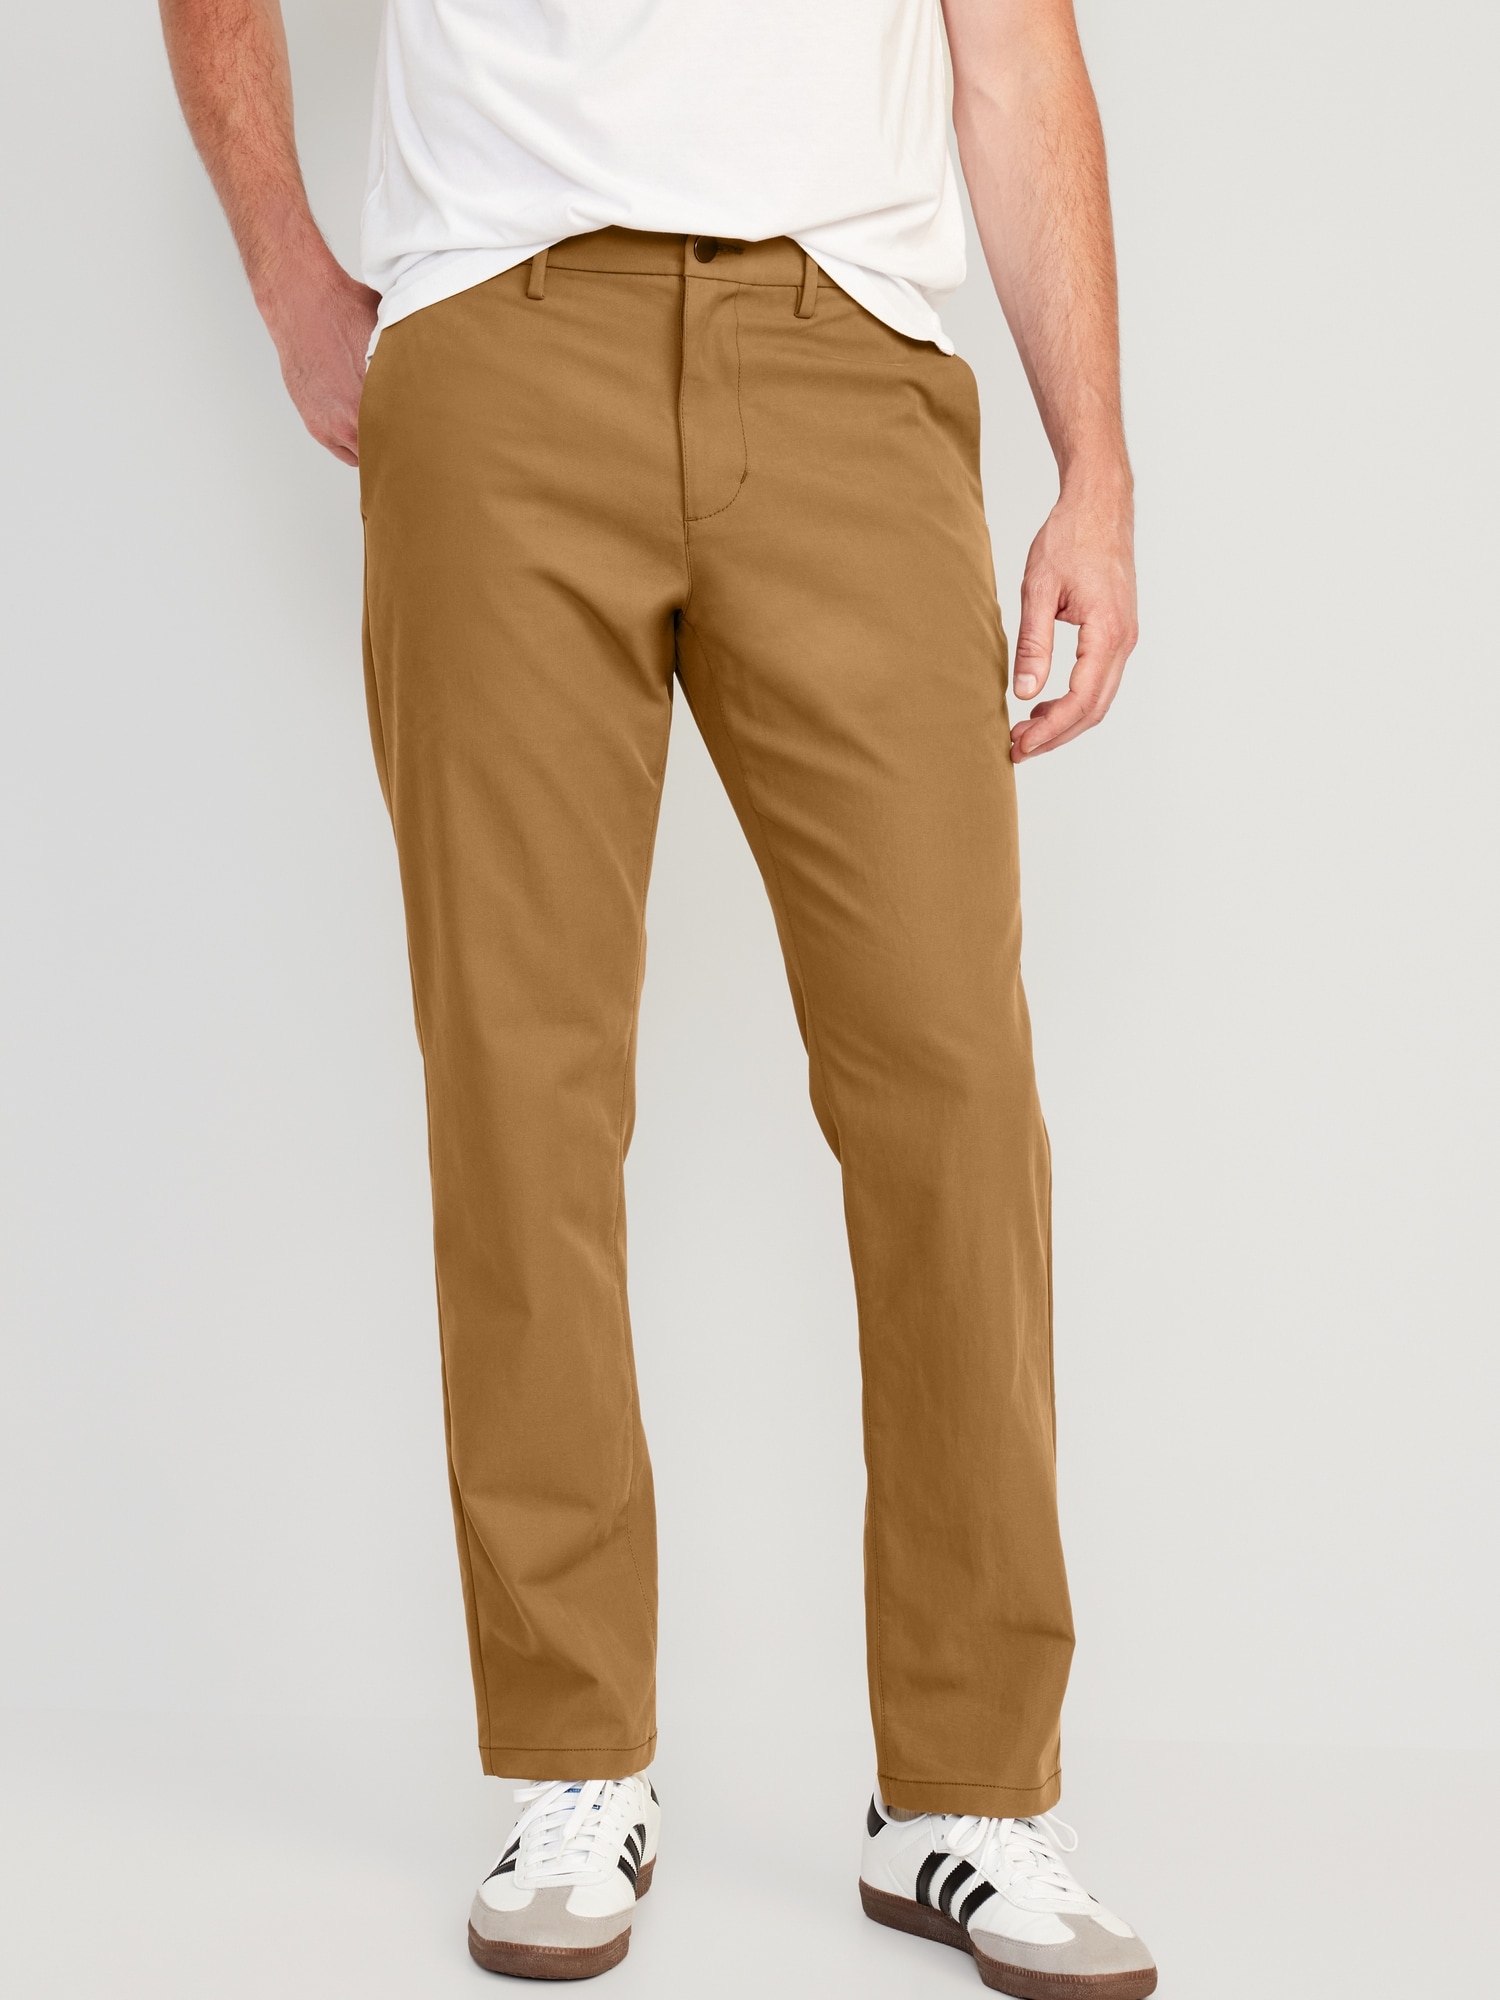 Slim Ultimate BuiltIn Flex Textured Chino Pants for Men  Old Navy